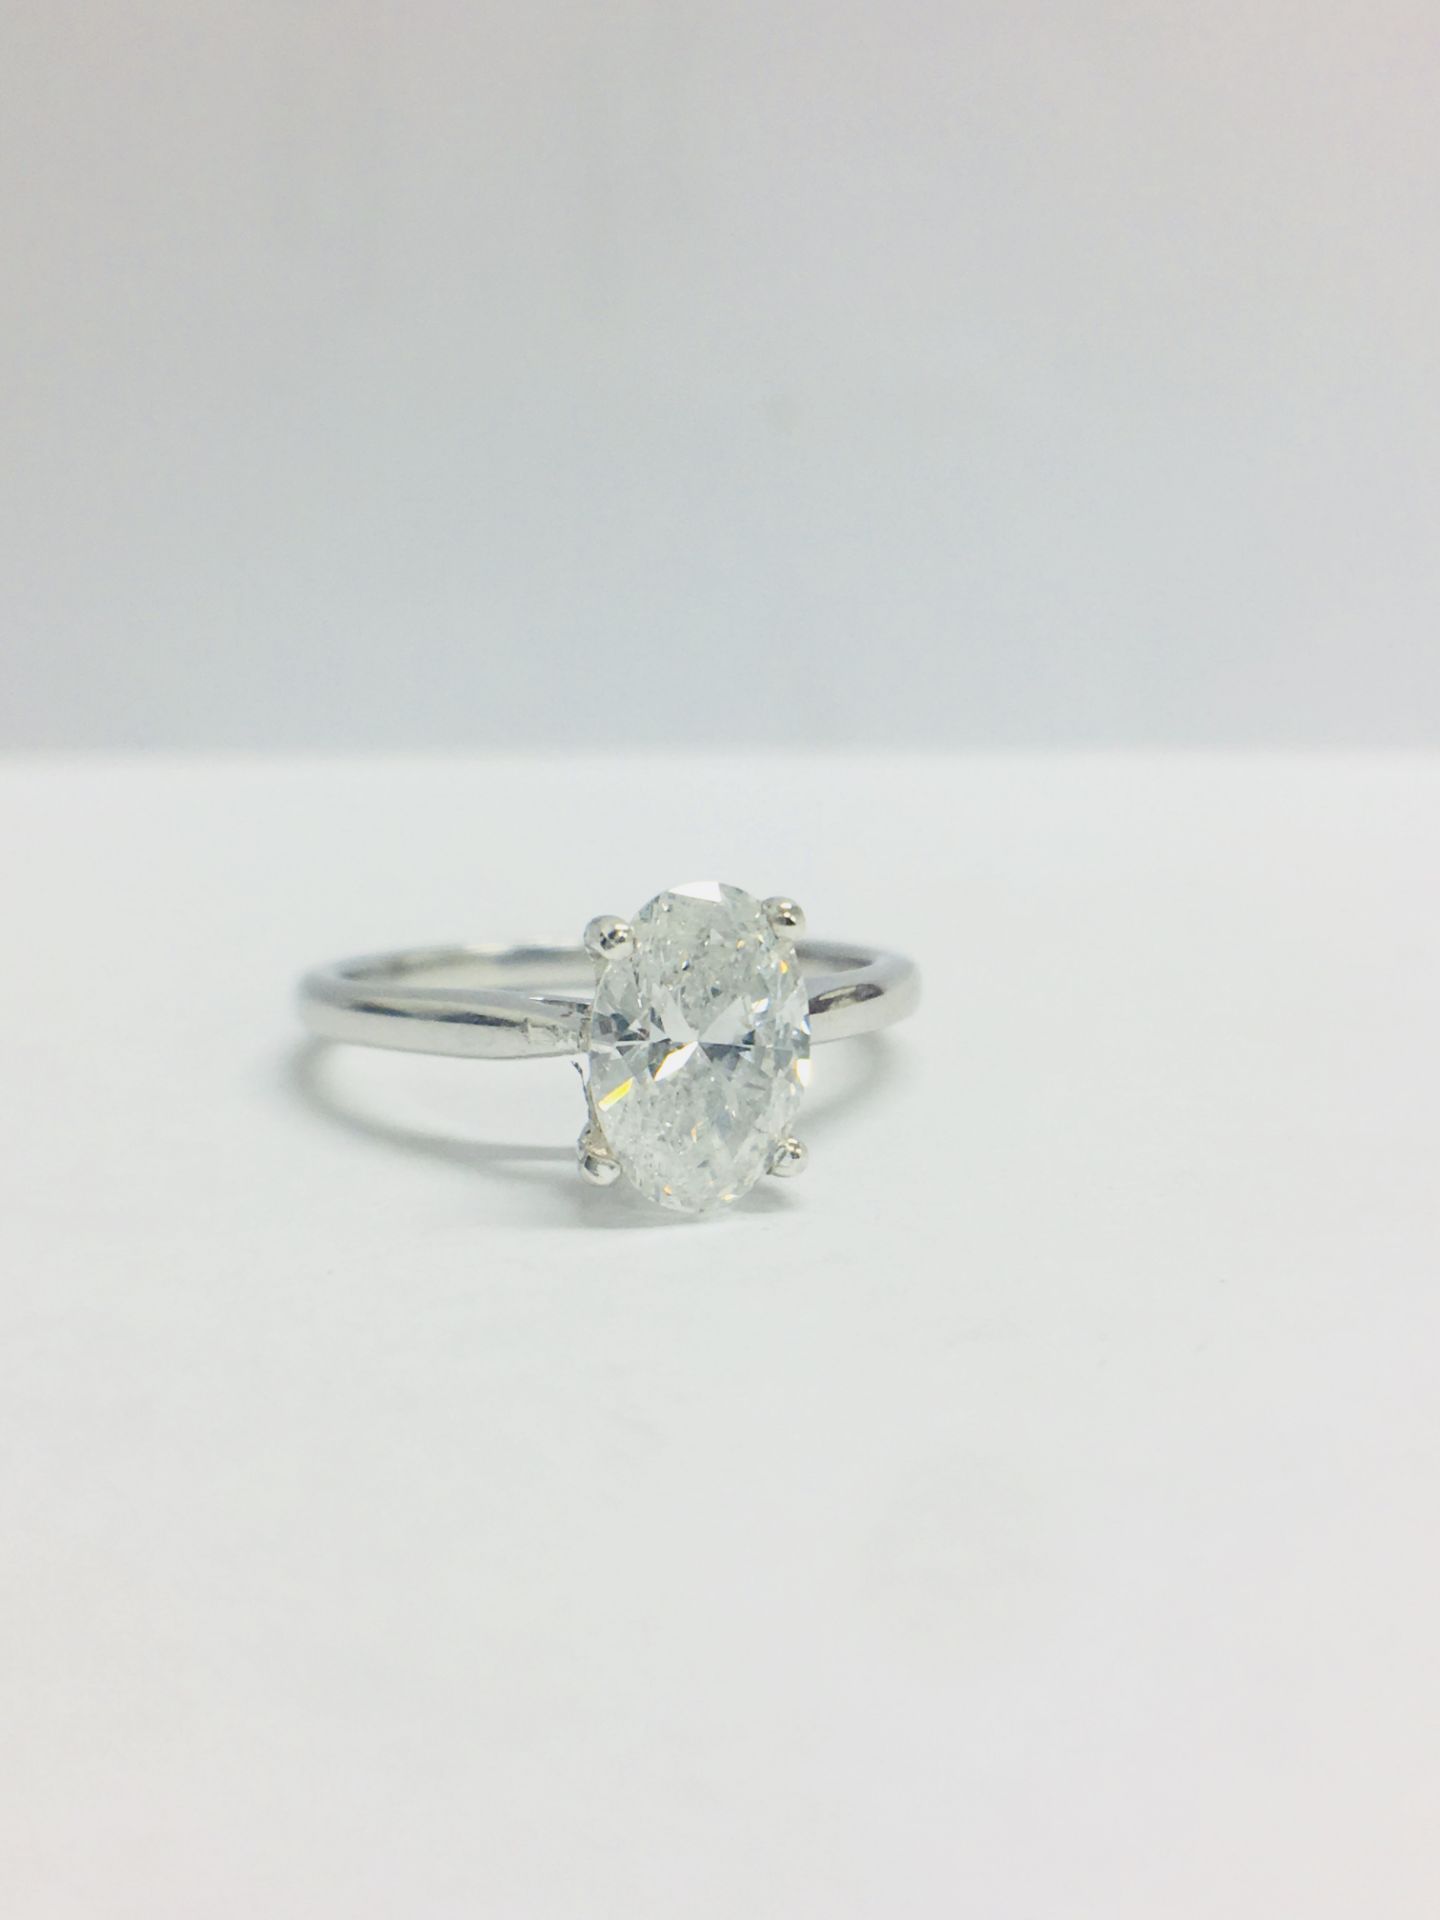 1Ct Oval Cut Diamond Solitaire Ring, - Image 10 of 11